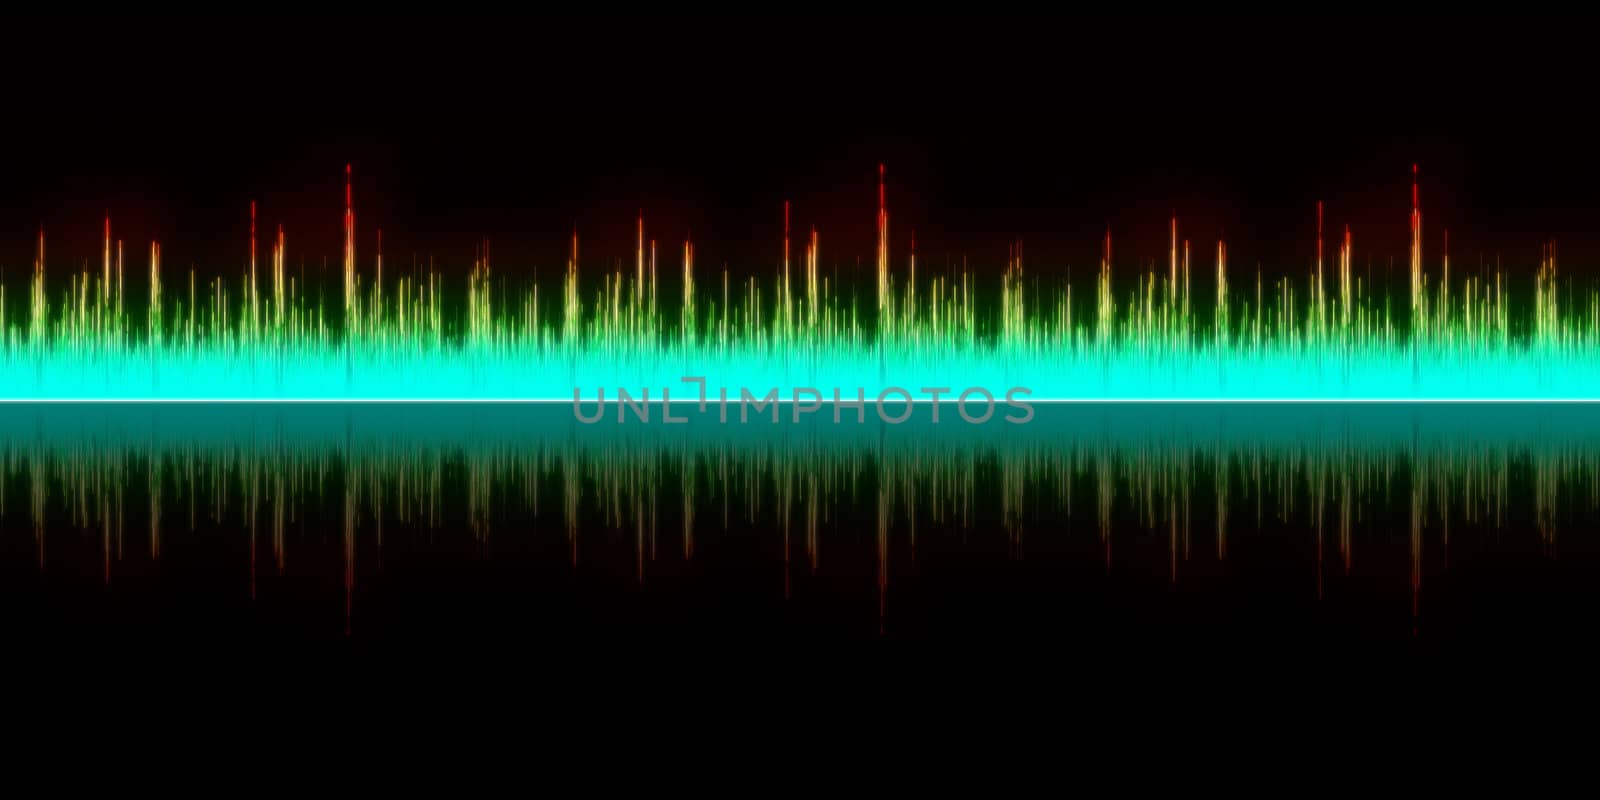 An image of a nice sound wave background